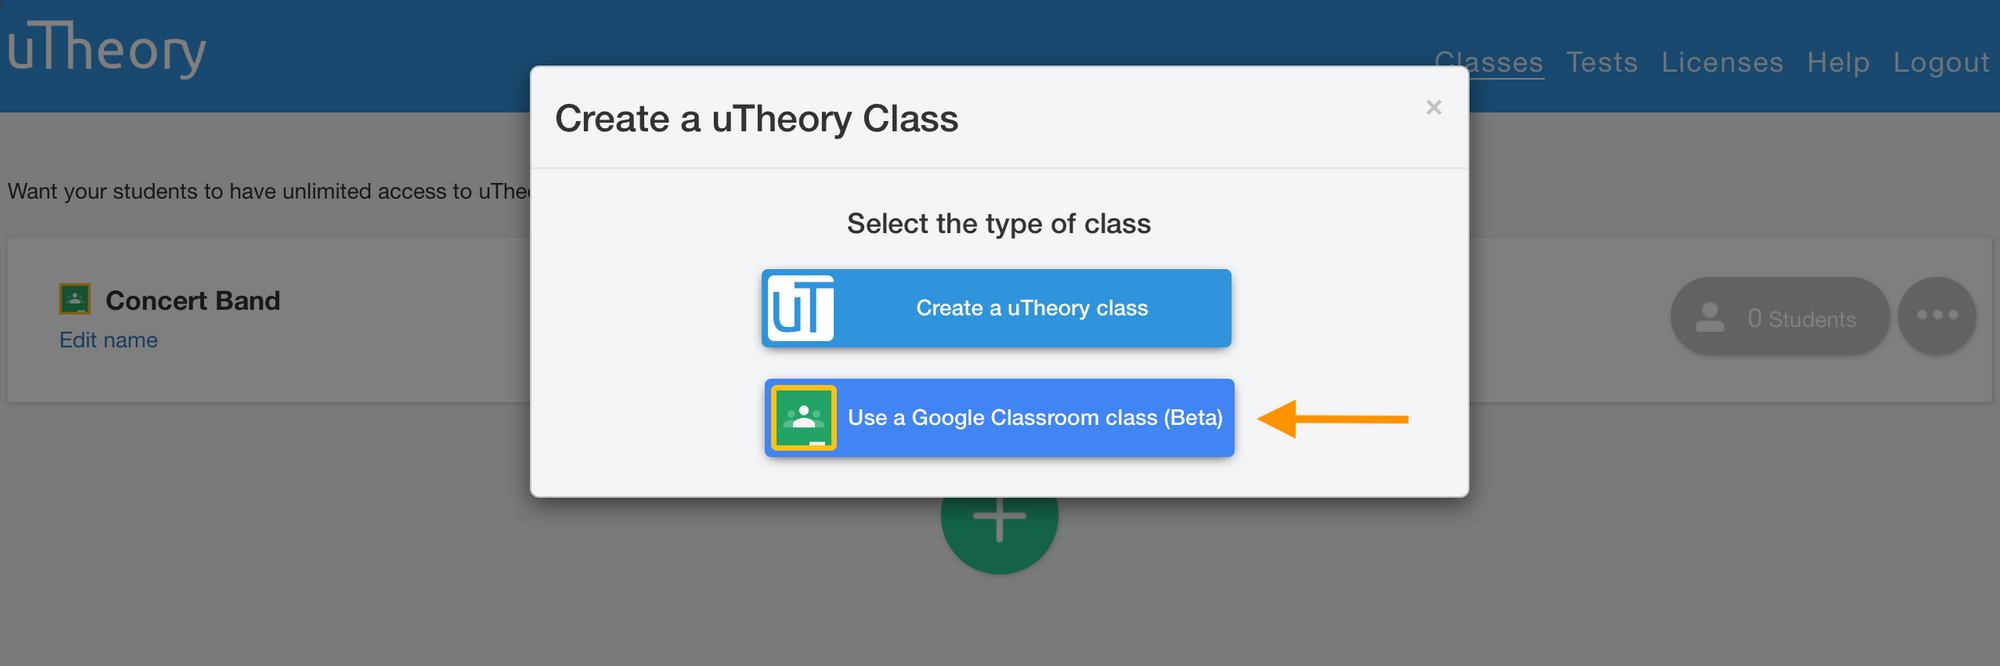 Image of connecting a Google Classroom to uTheory.